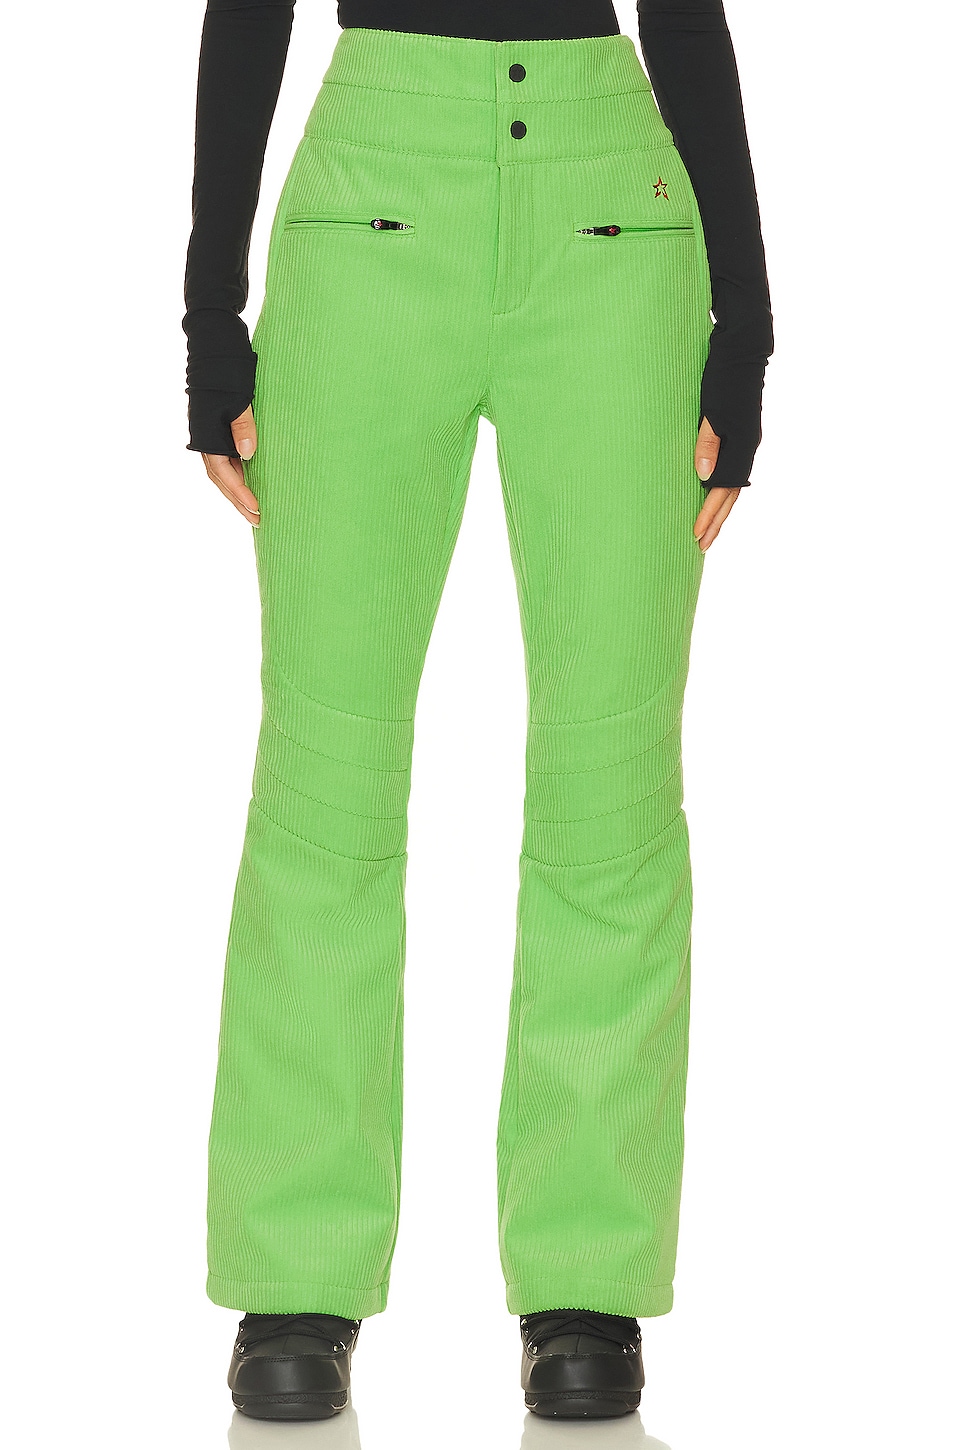 Perfect Moment Aurora Flare Pant in Pear Green